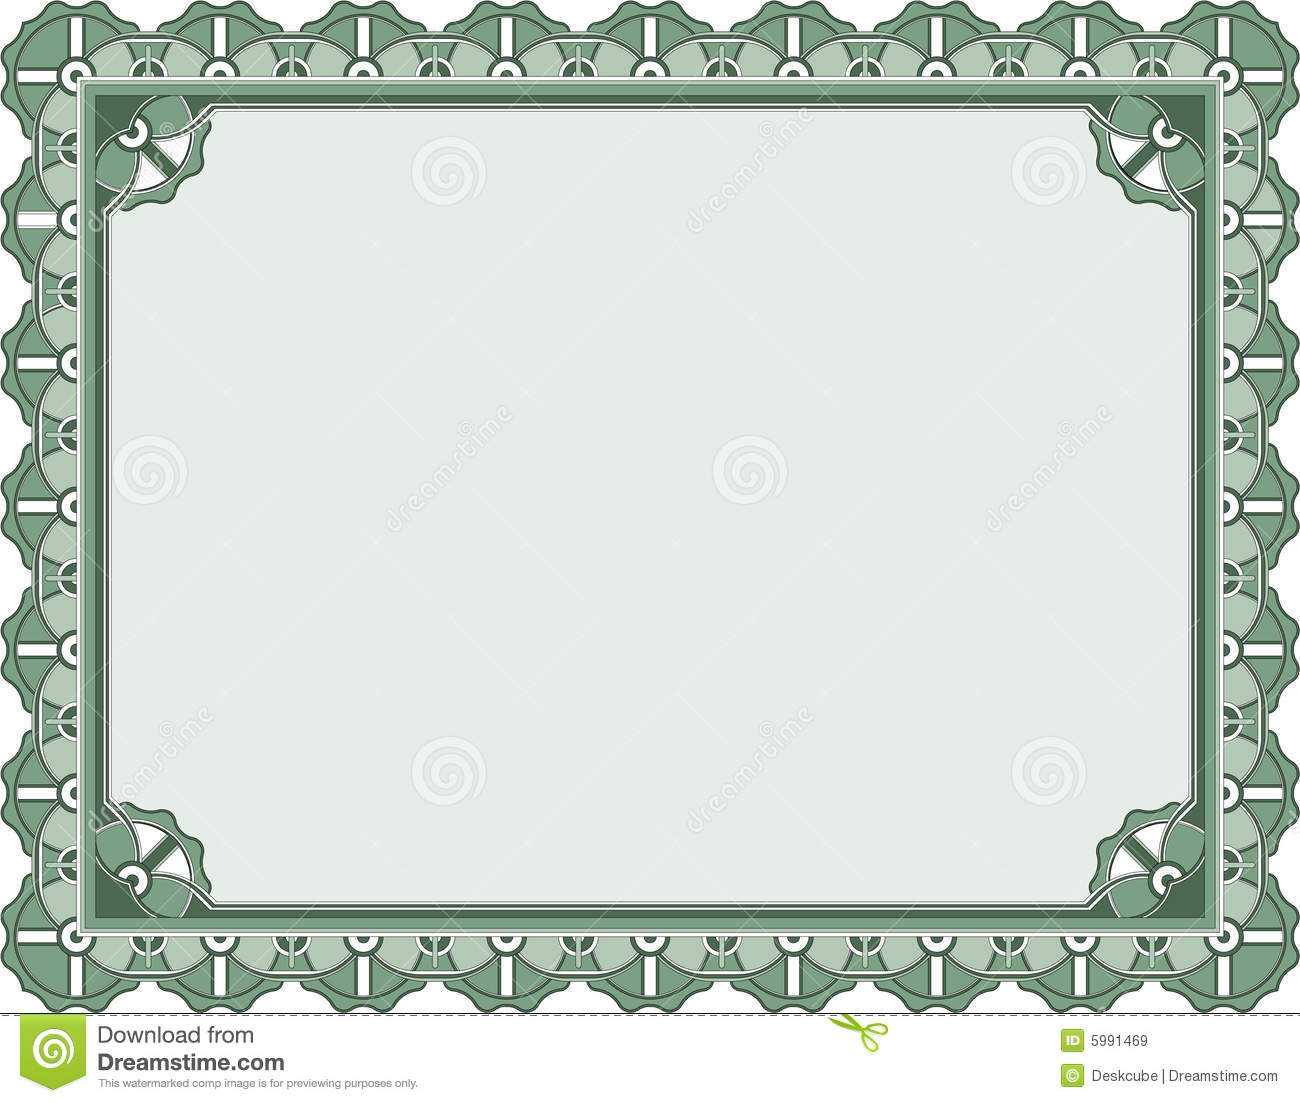 Award Certificate Template Stock Vector. Illustration Of Pertaining To Award Certificate Border Template